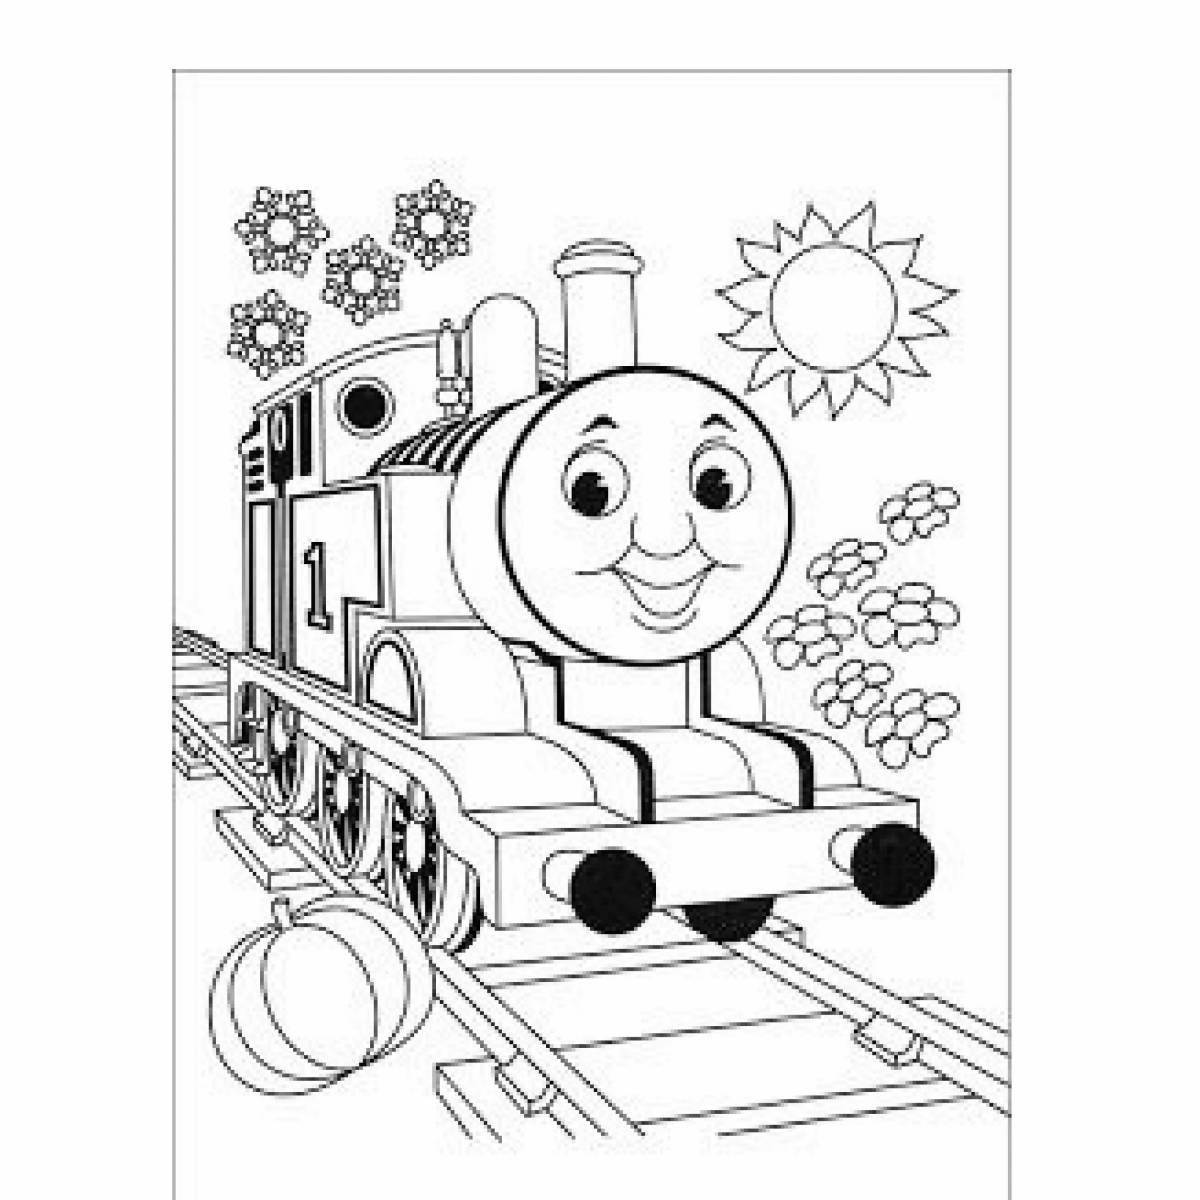 Glorious Spiderman Thomas the Tank Engine Coloring Page